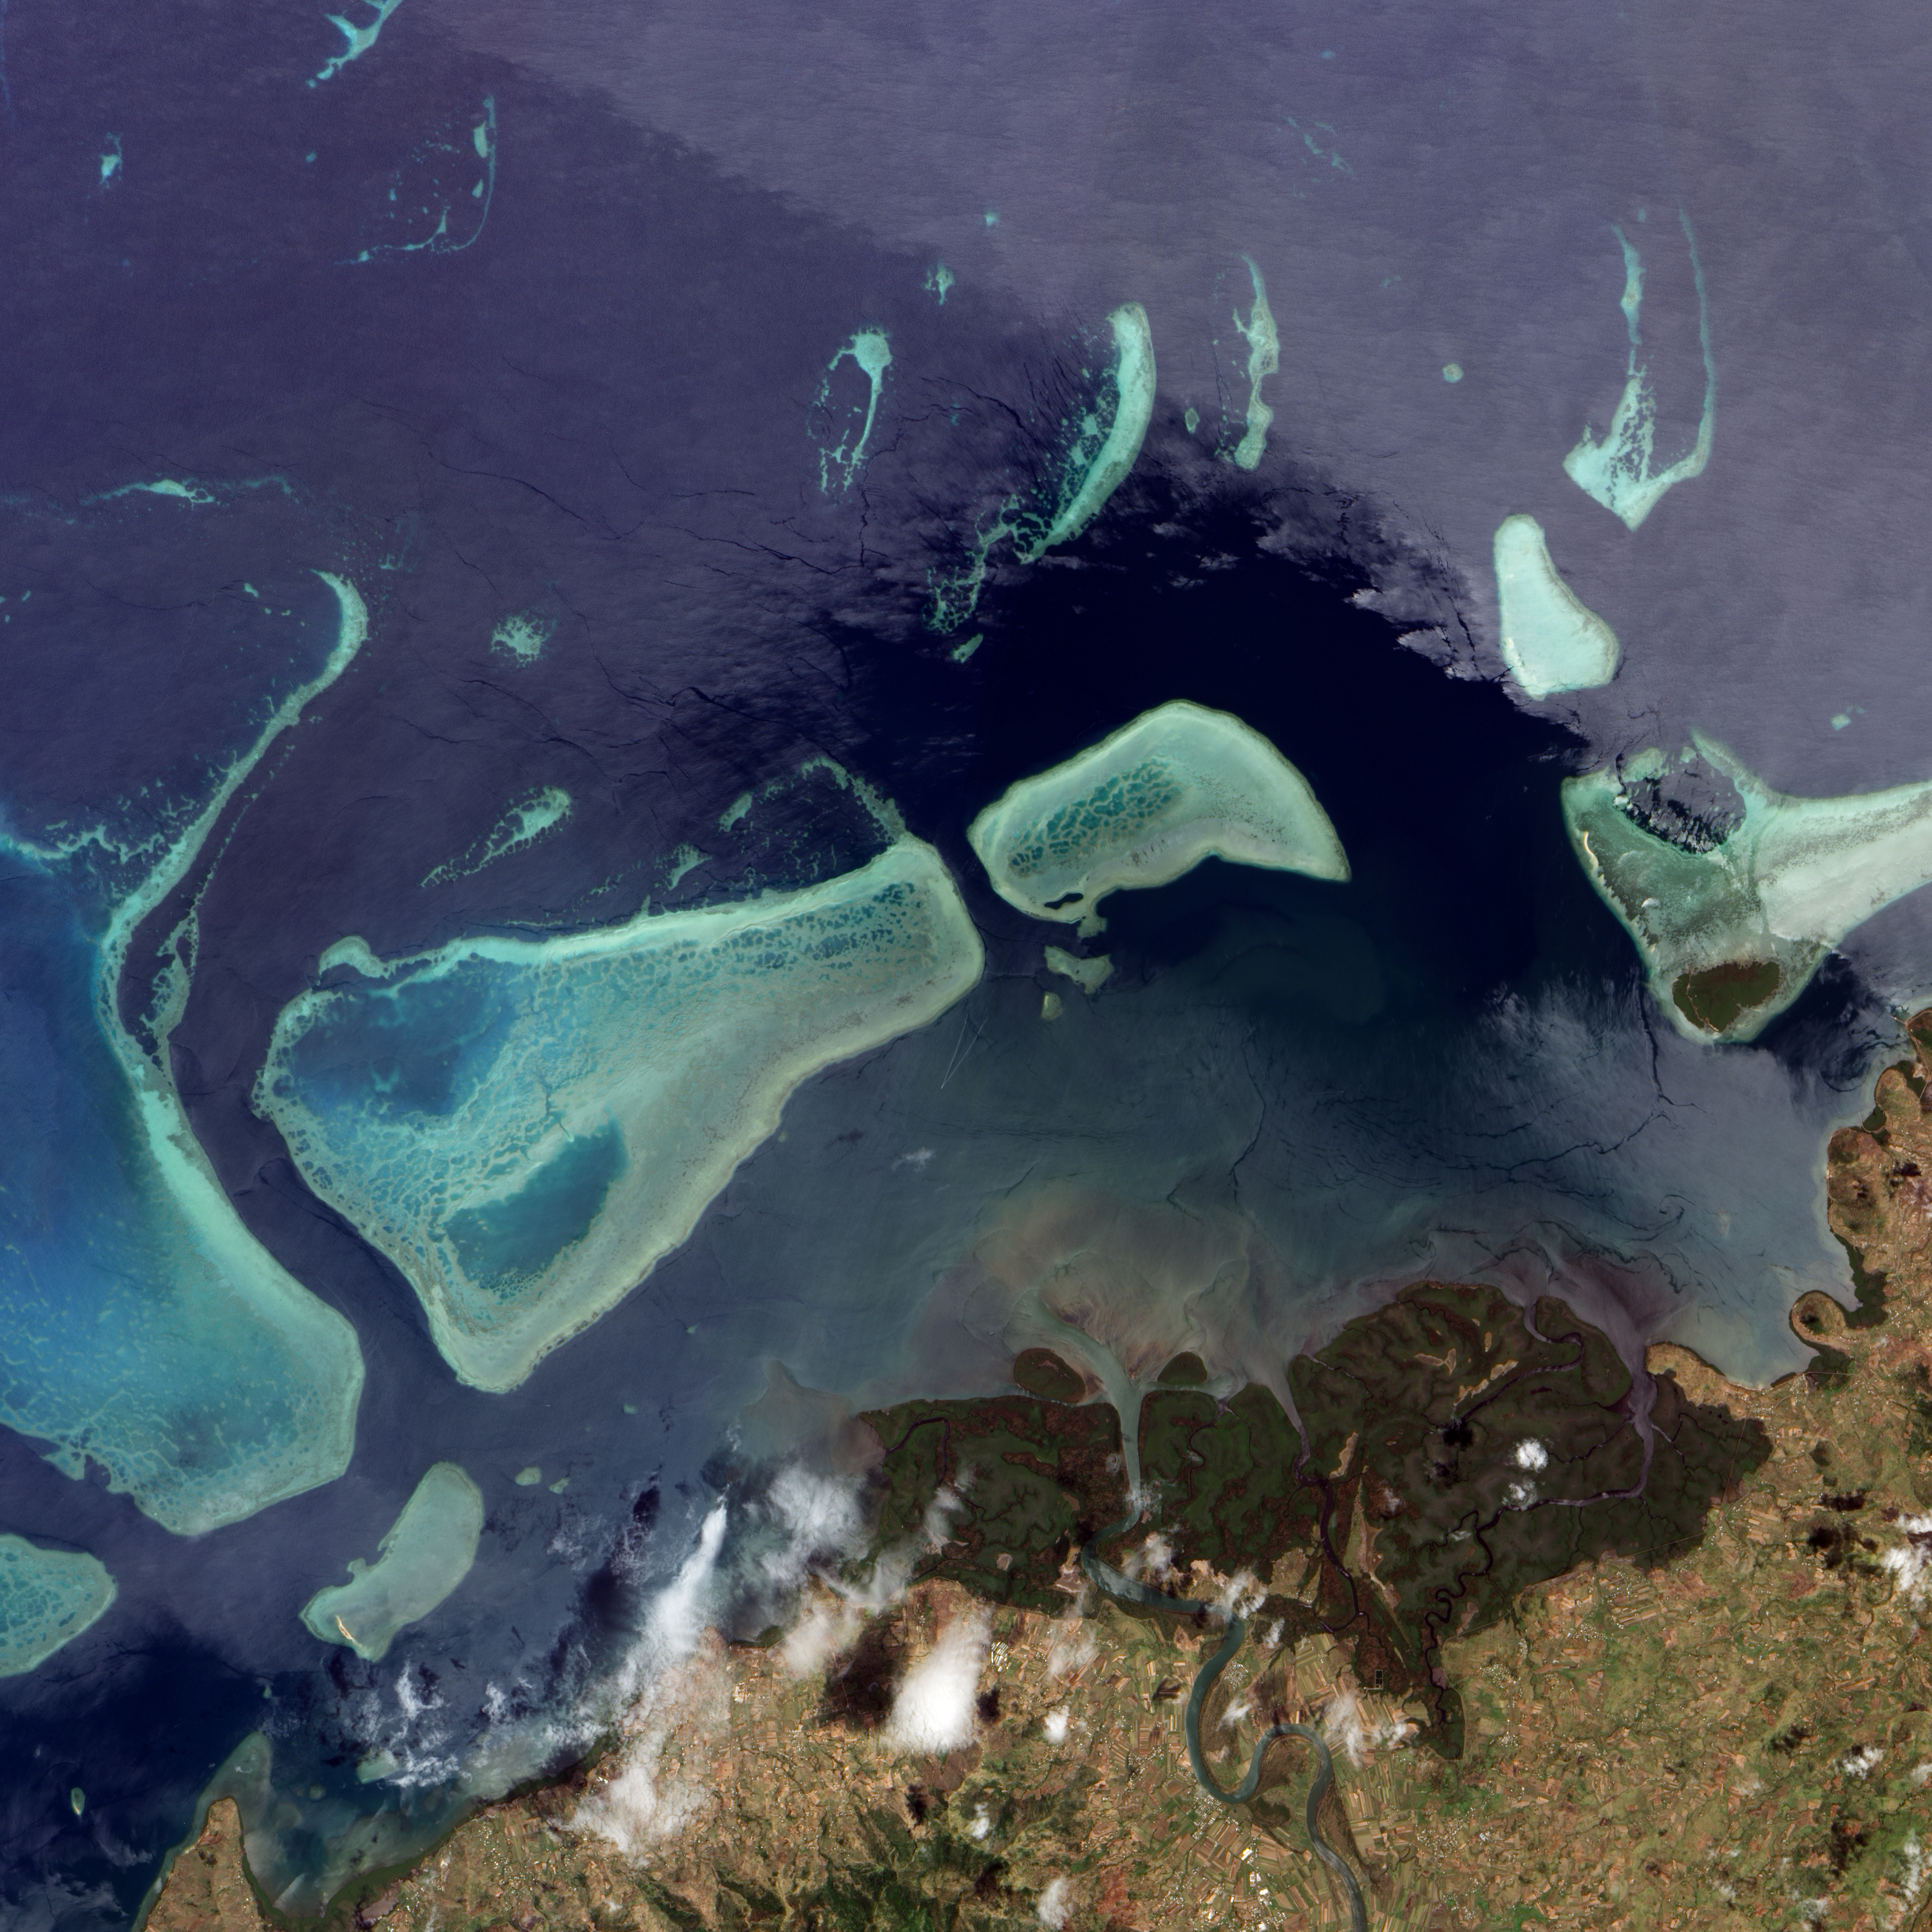 Mangroves and Coral Reefs, Viti Levu, Fiji - related image preview